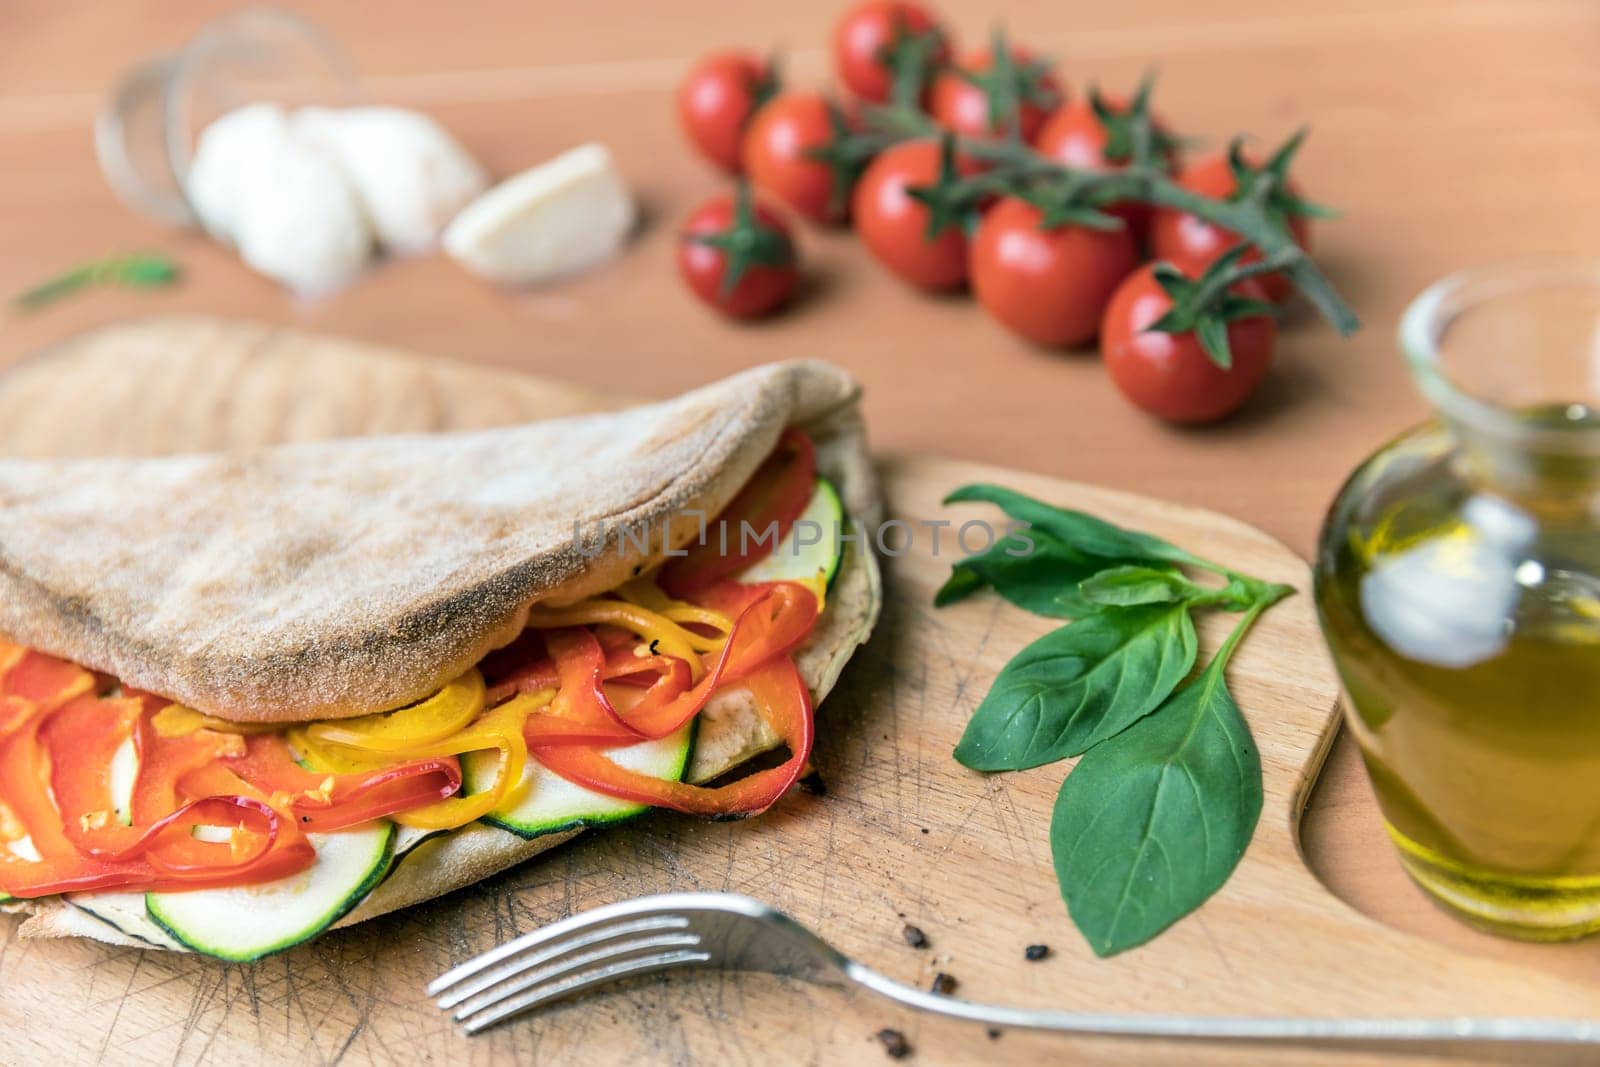 Italian food, closed vegetarian calzone pizza on rustic wooden background. Peppers and zucchini. On background small red tomatoes, mozzarella, basil and crude oil. Fork. Selective focus.